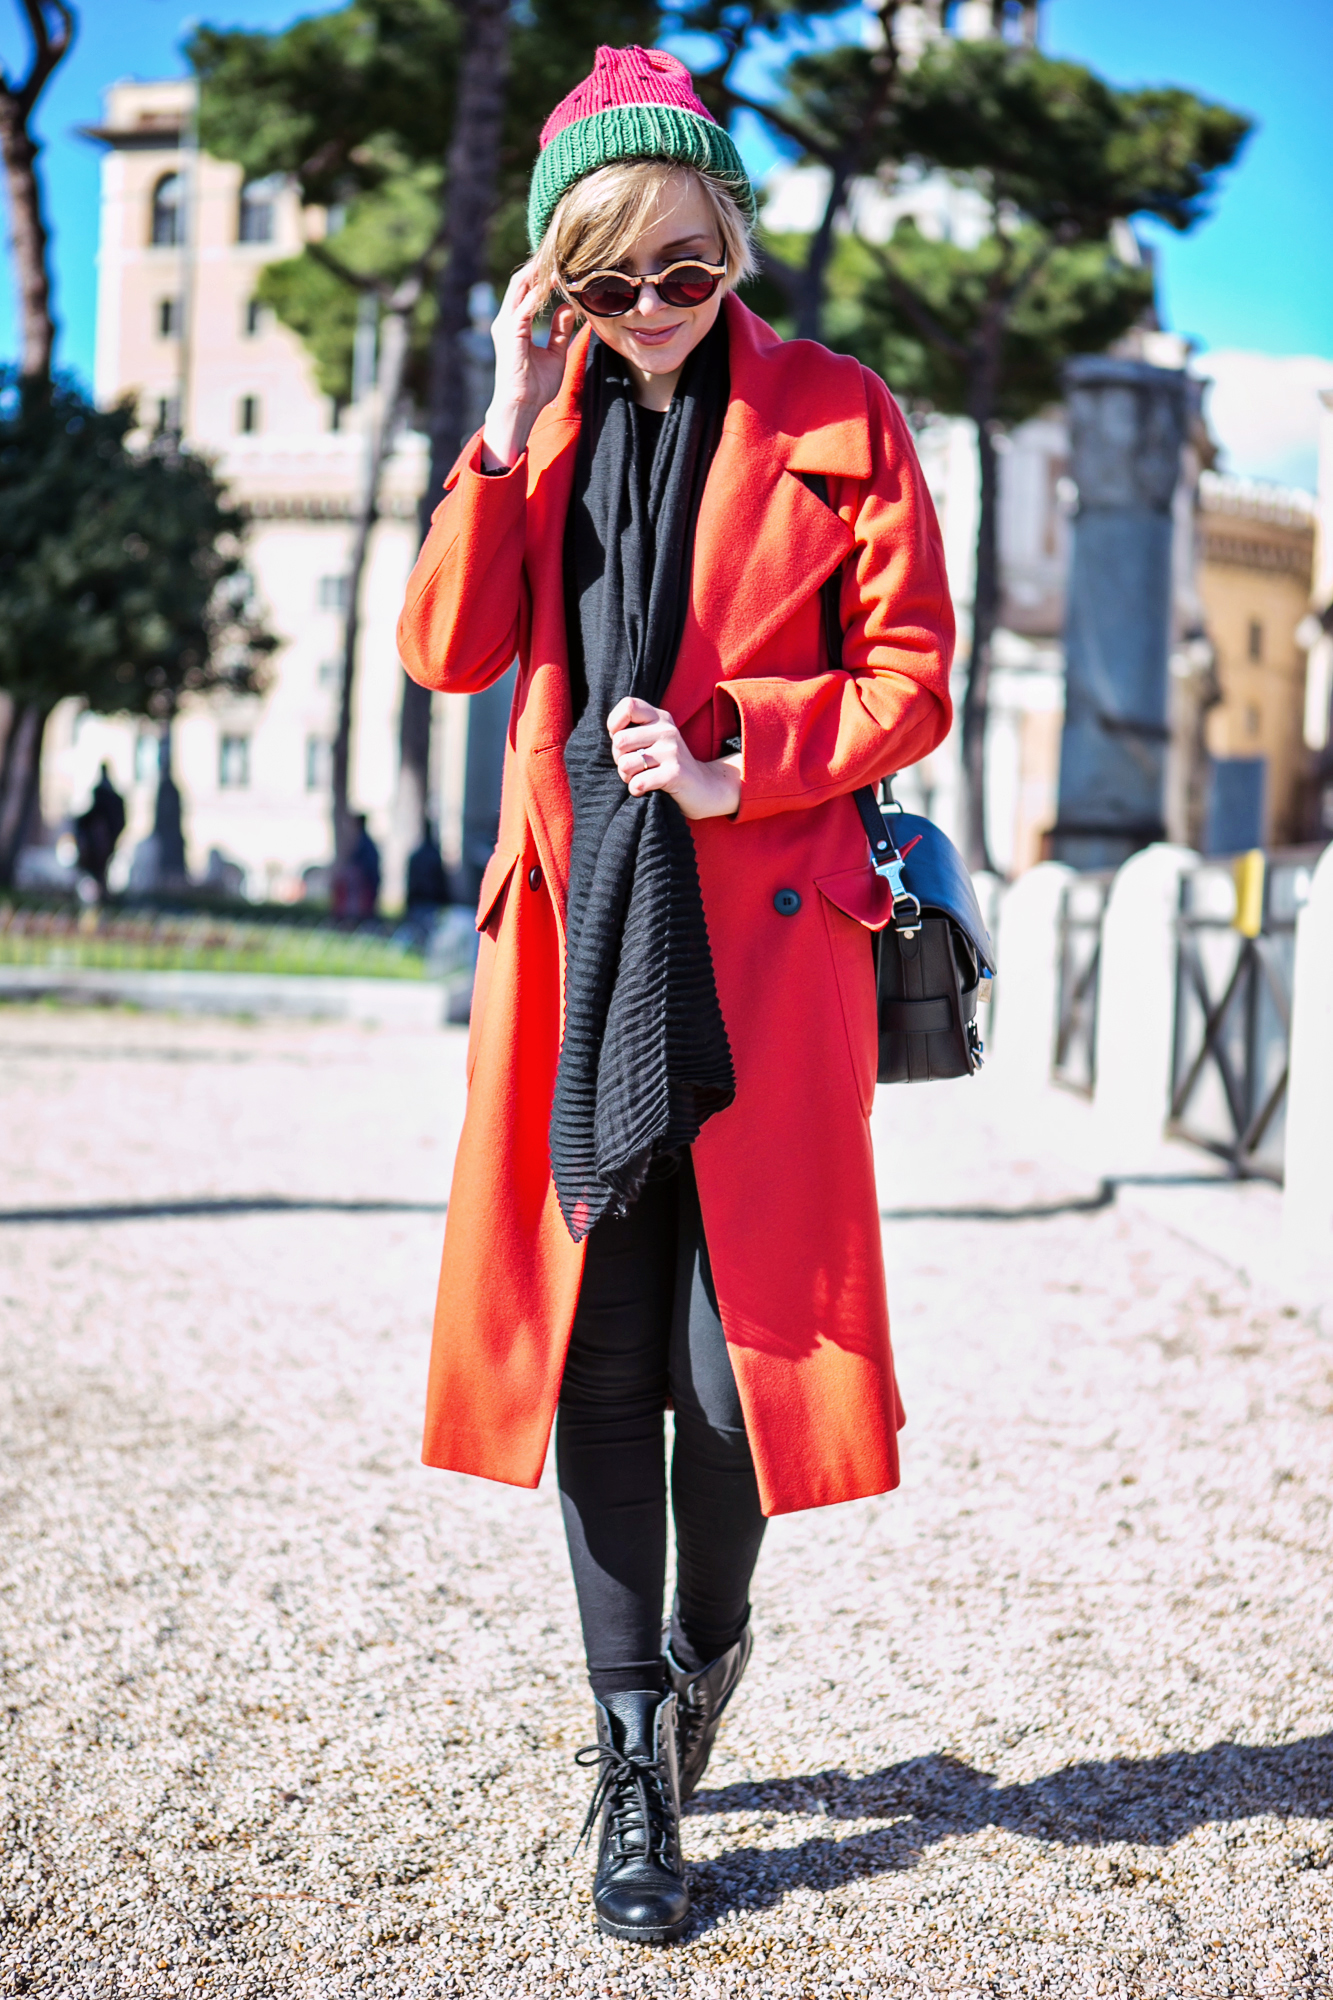 darya kamalova thecablook russian italian fashion bogger street style trend asos long red coat watermelon hat proenza schouler ps11 bag dr denim jeans rome roma centro storico le bunny blue booties italia italy-44